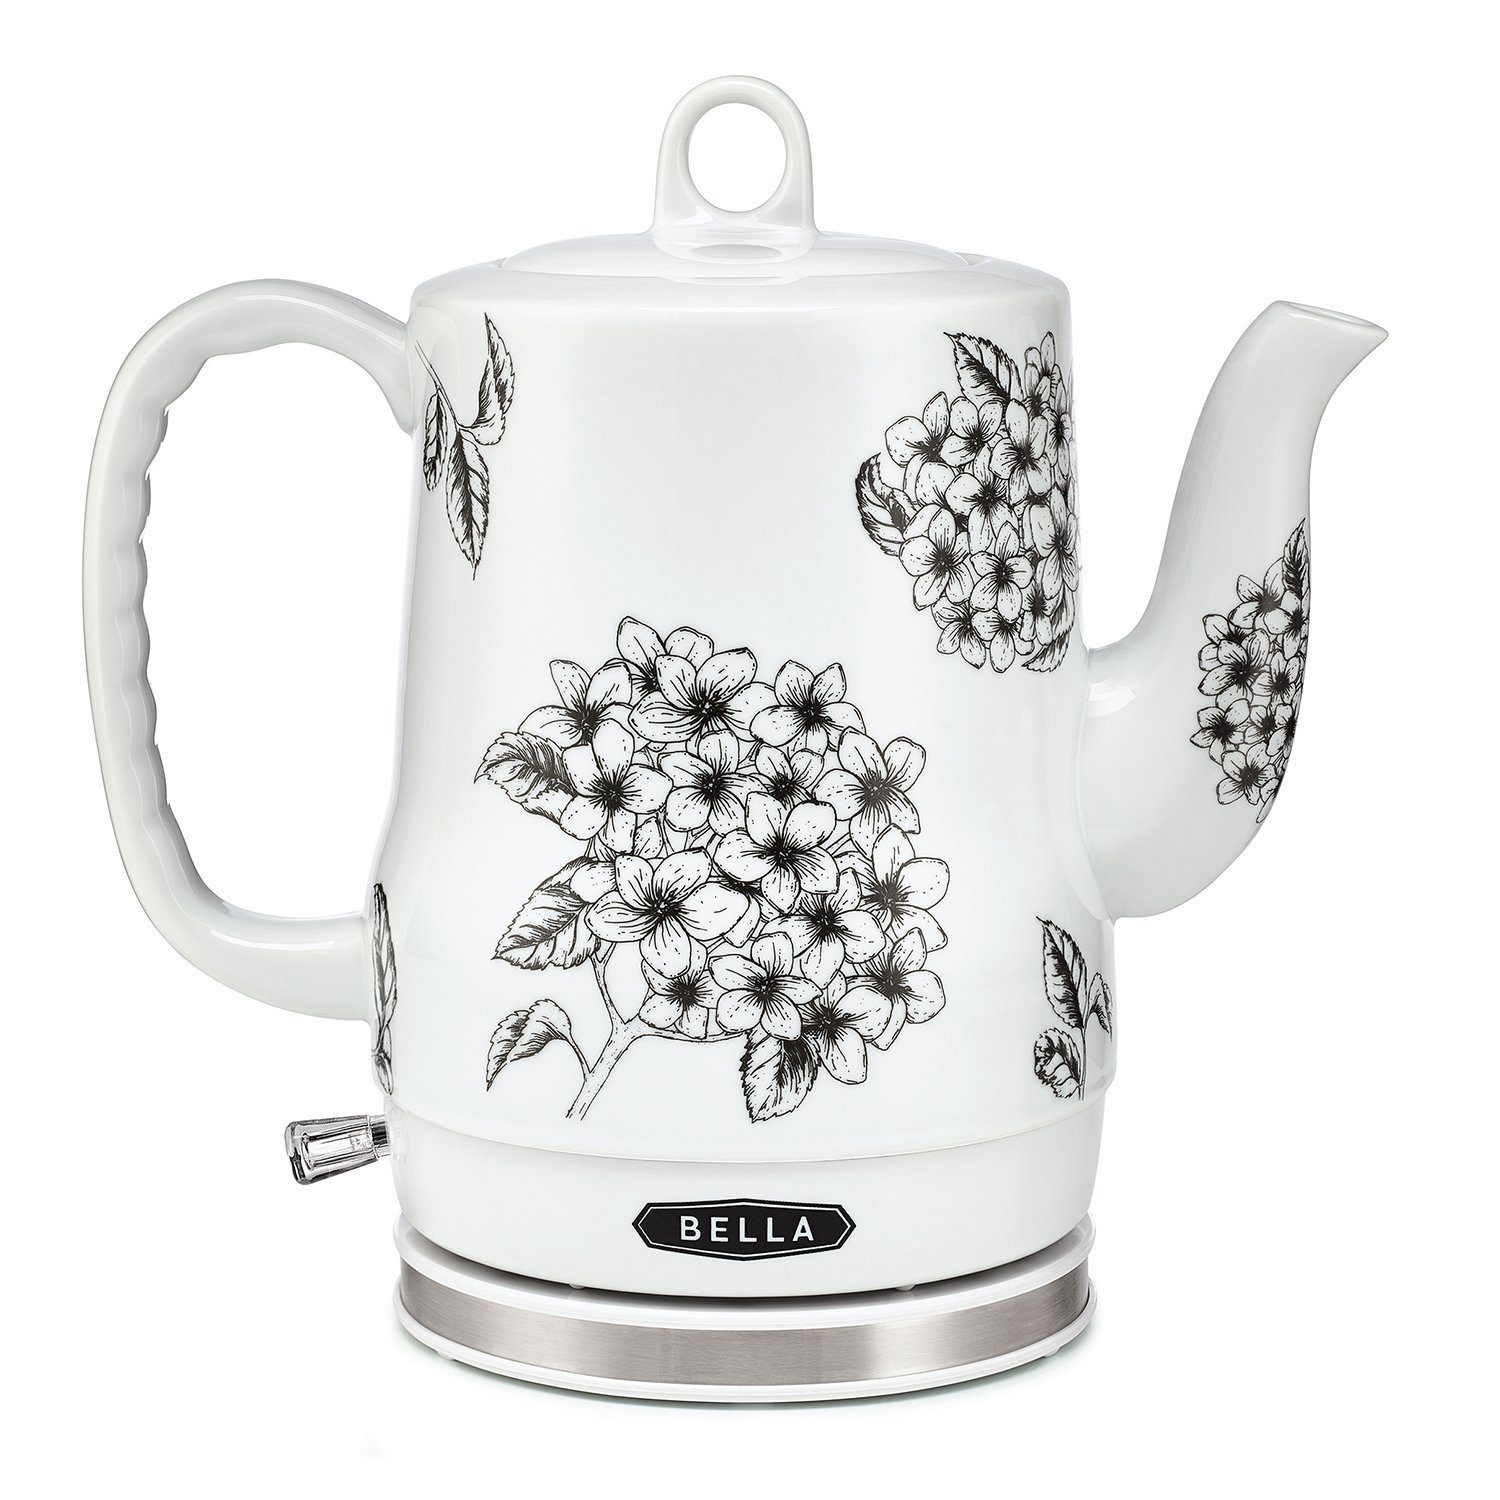 Bella 1.2L Electric Ceramic Tea Kettle with Detachable Base and Boil Dry Protection